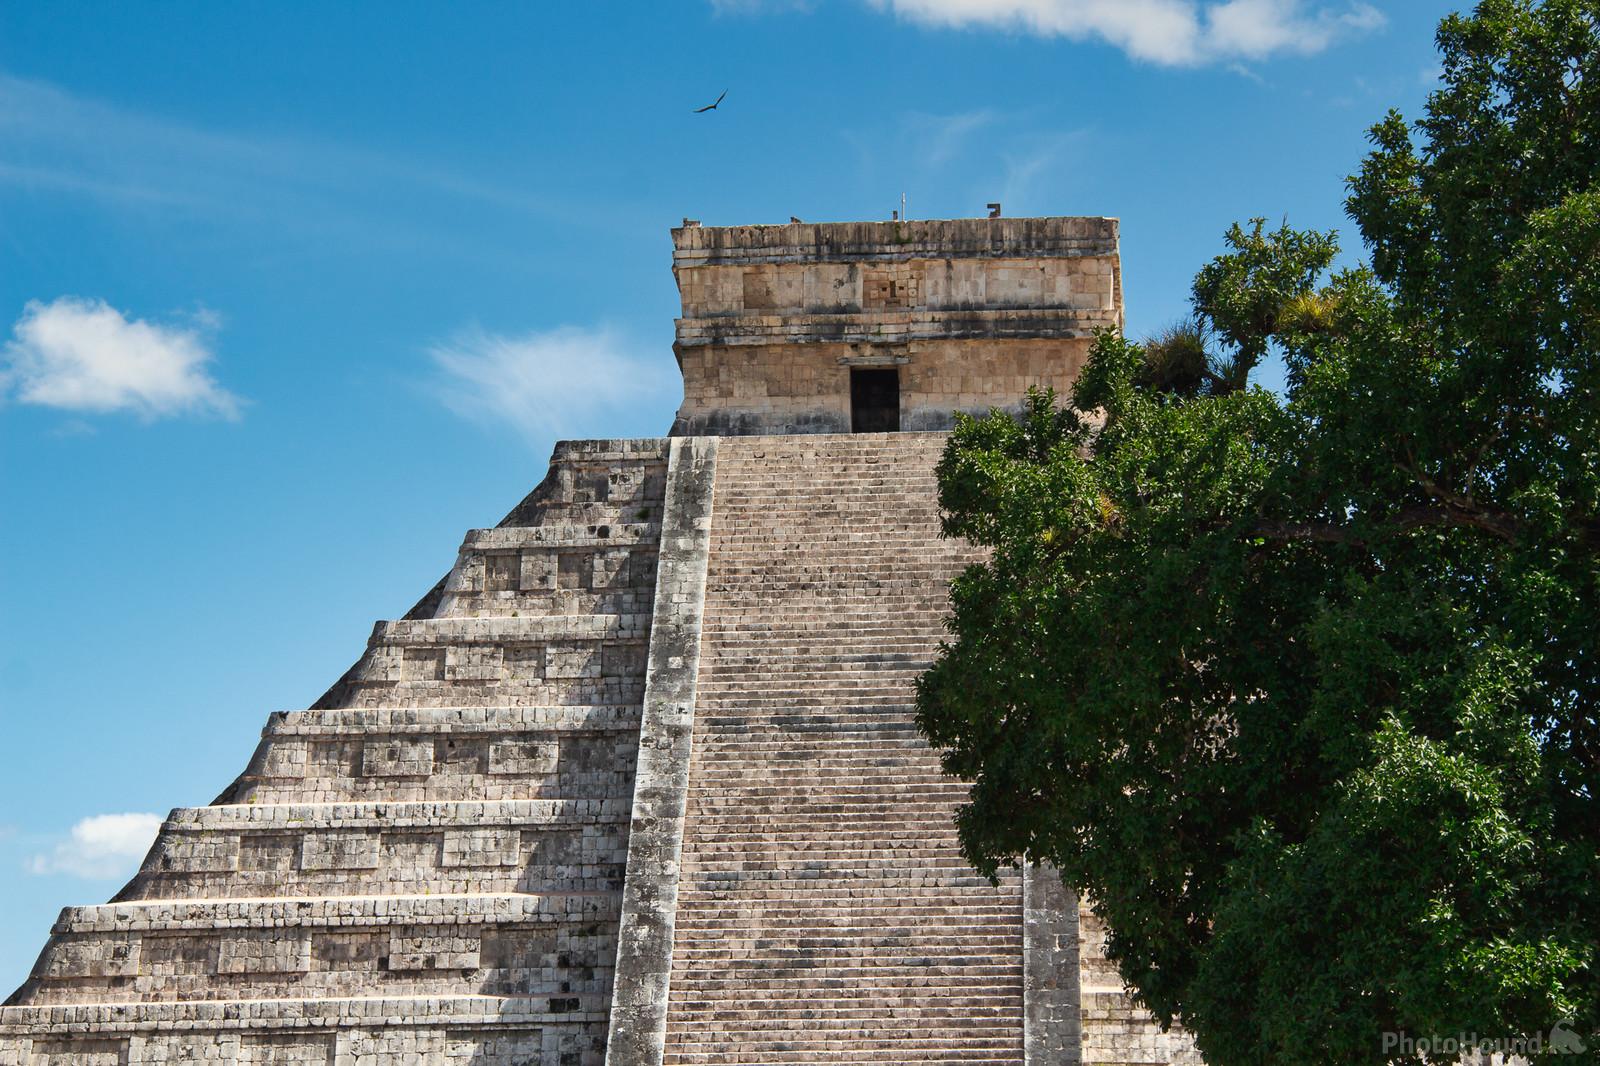 Image of Chichen Itza - El Castillo (Temple of Kukulcan) by Mathew Browne